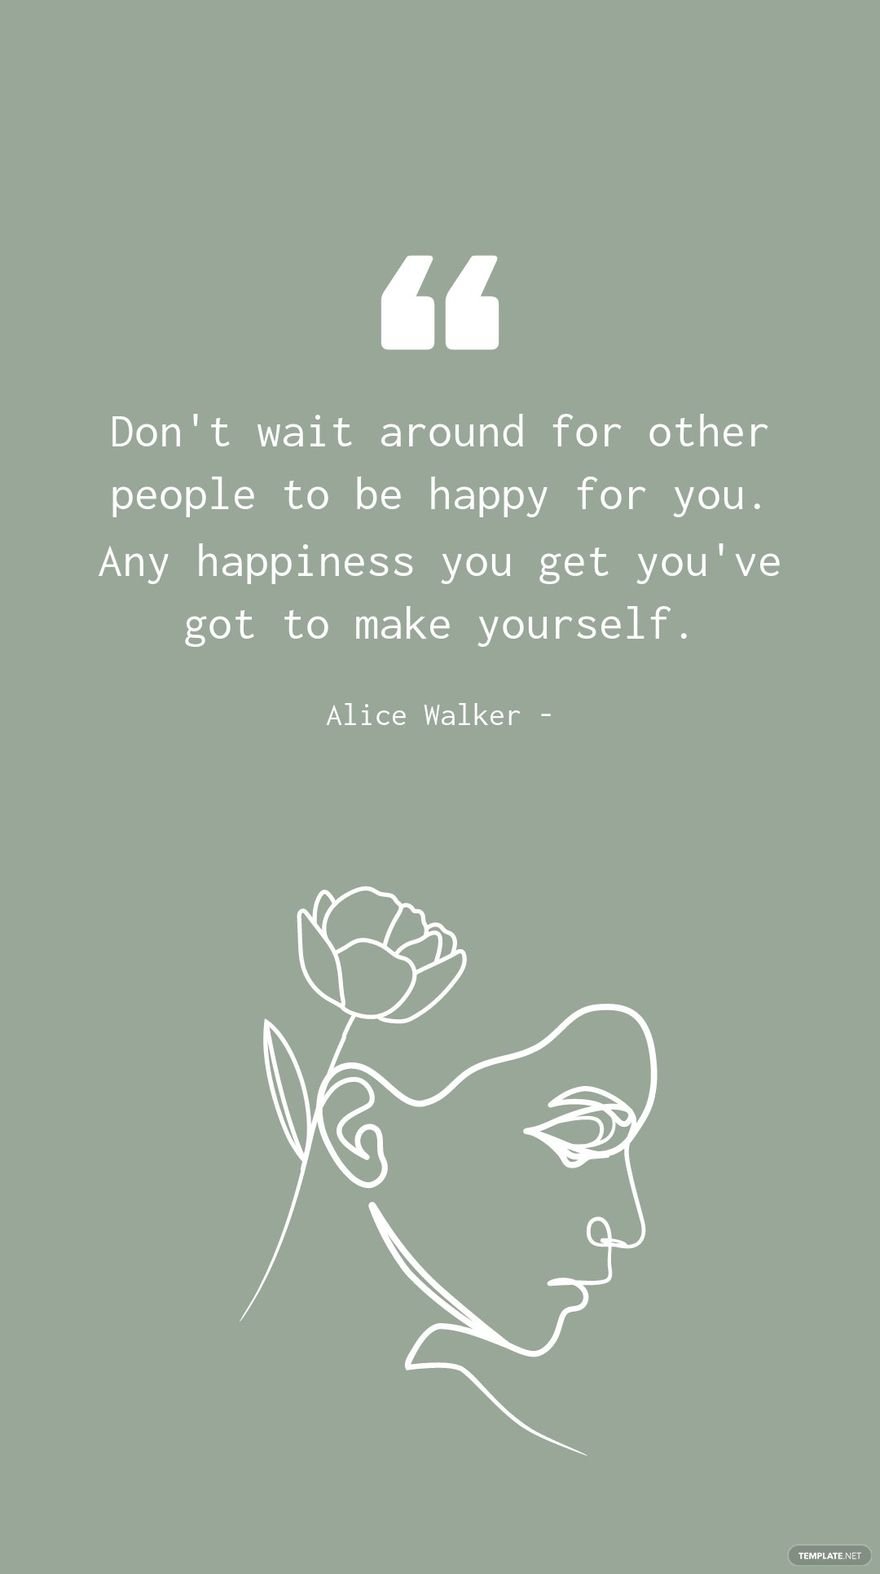 Free Alice Walker - Don't wait around for other people to be happy for you. Any happiness you get you've got to make yourself. in JPG